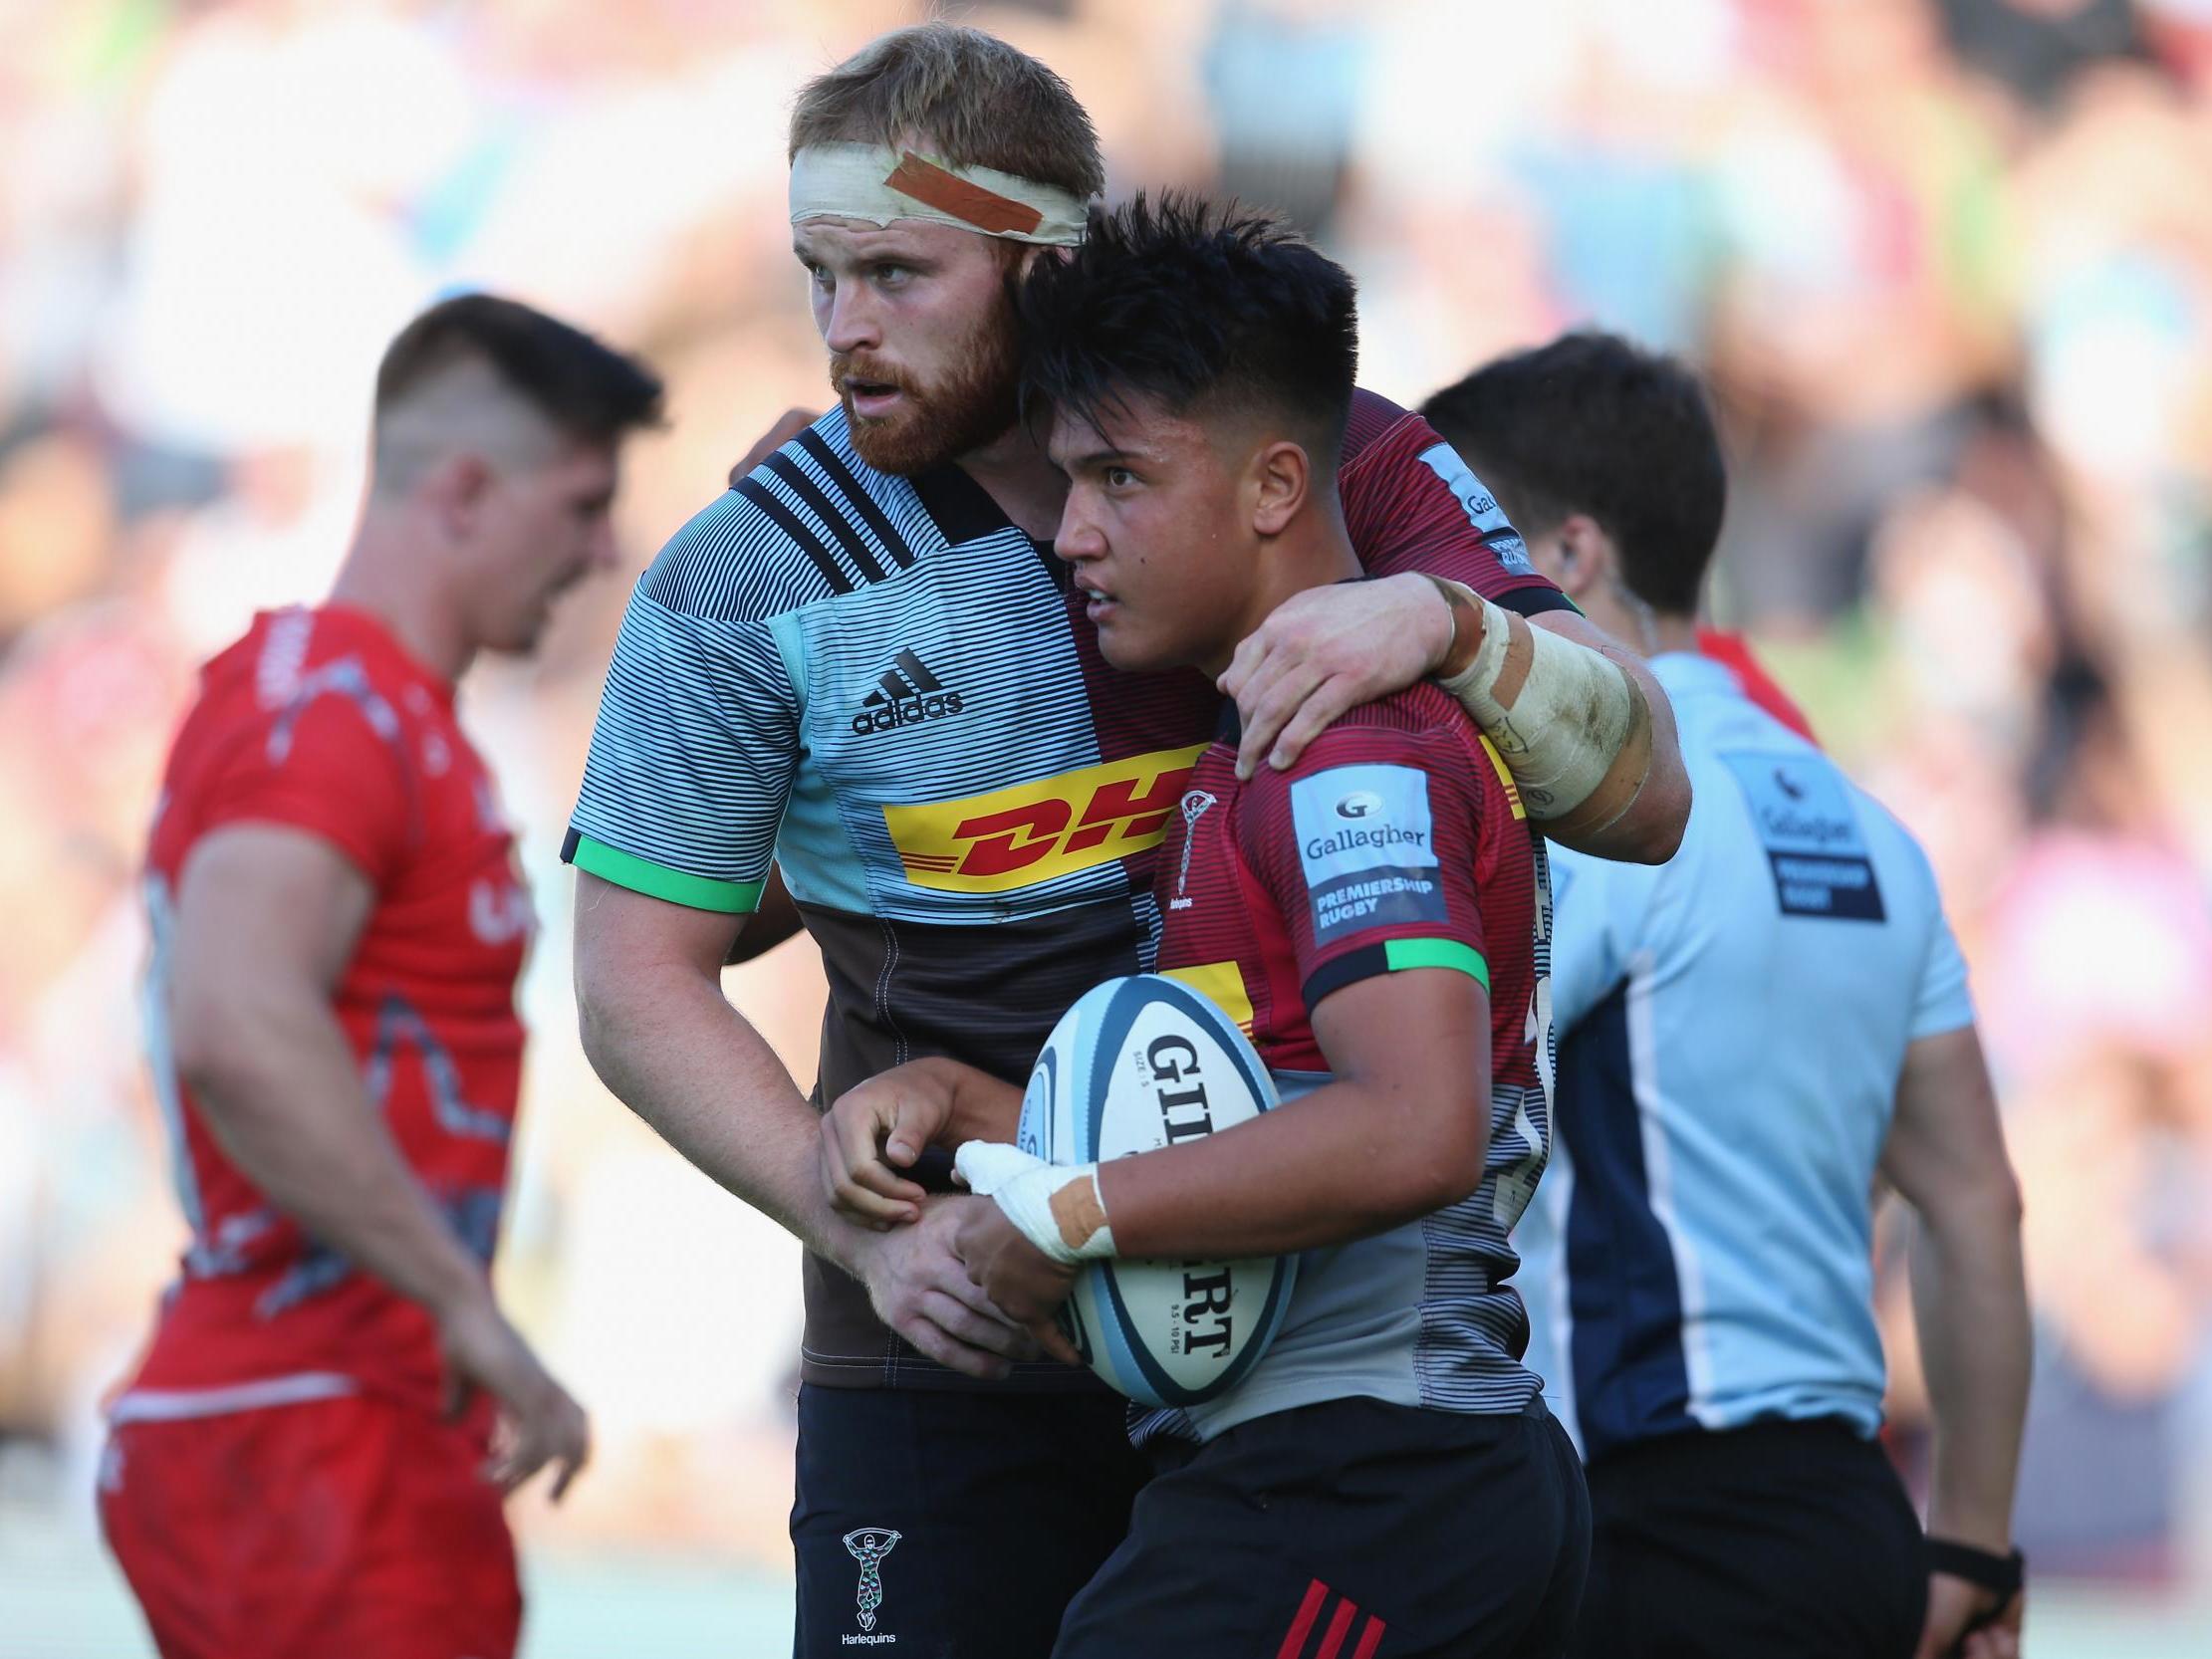 Marcus Smith hopes his performances at Harlequins will lead to a senior England call-up